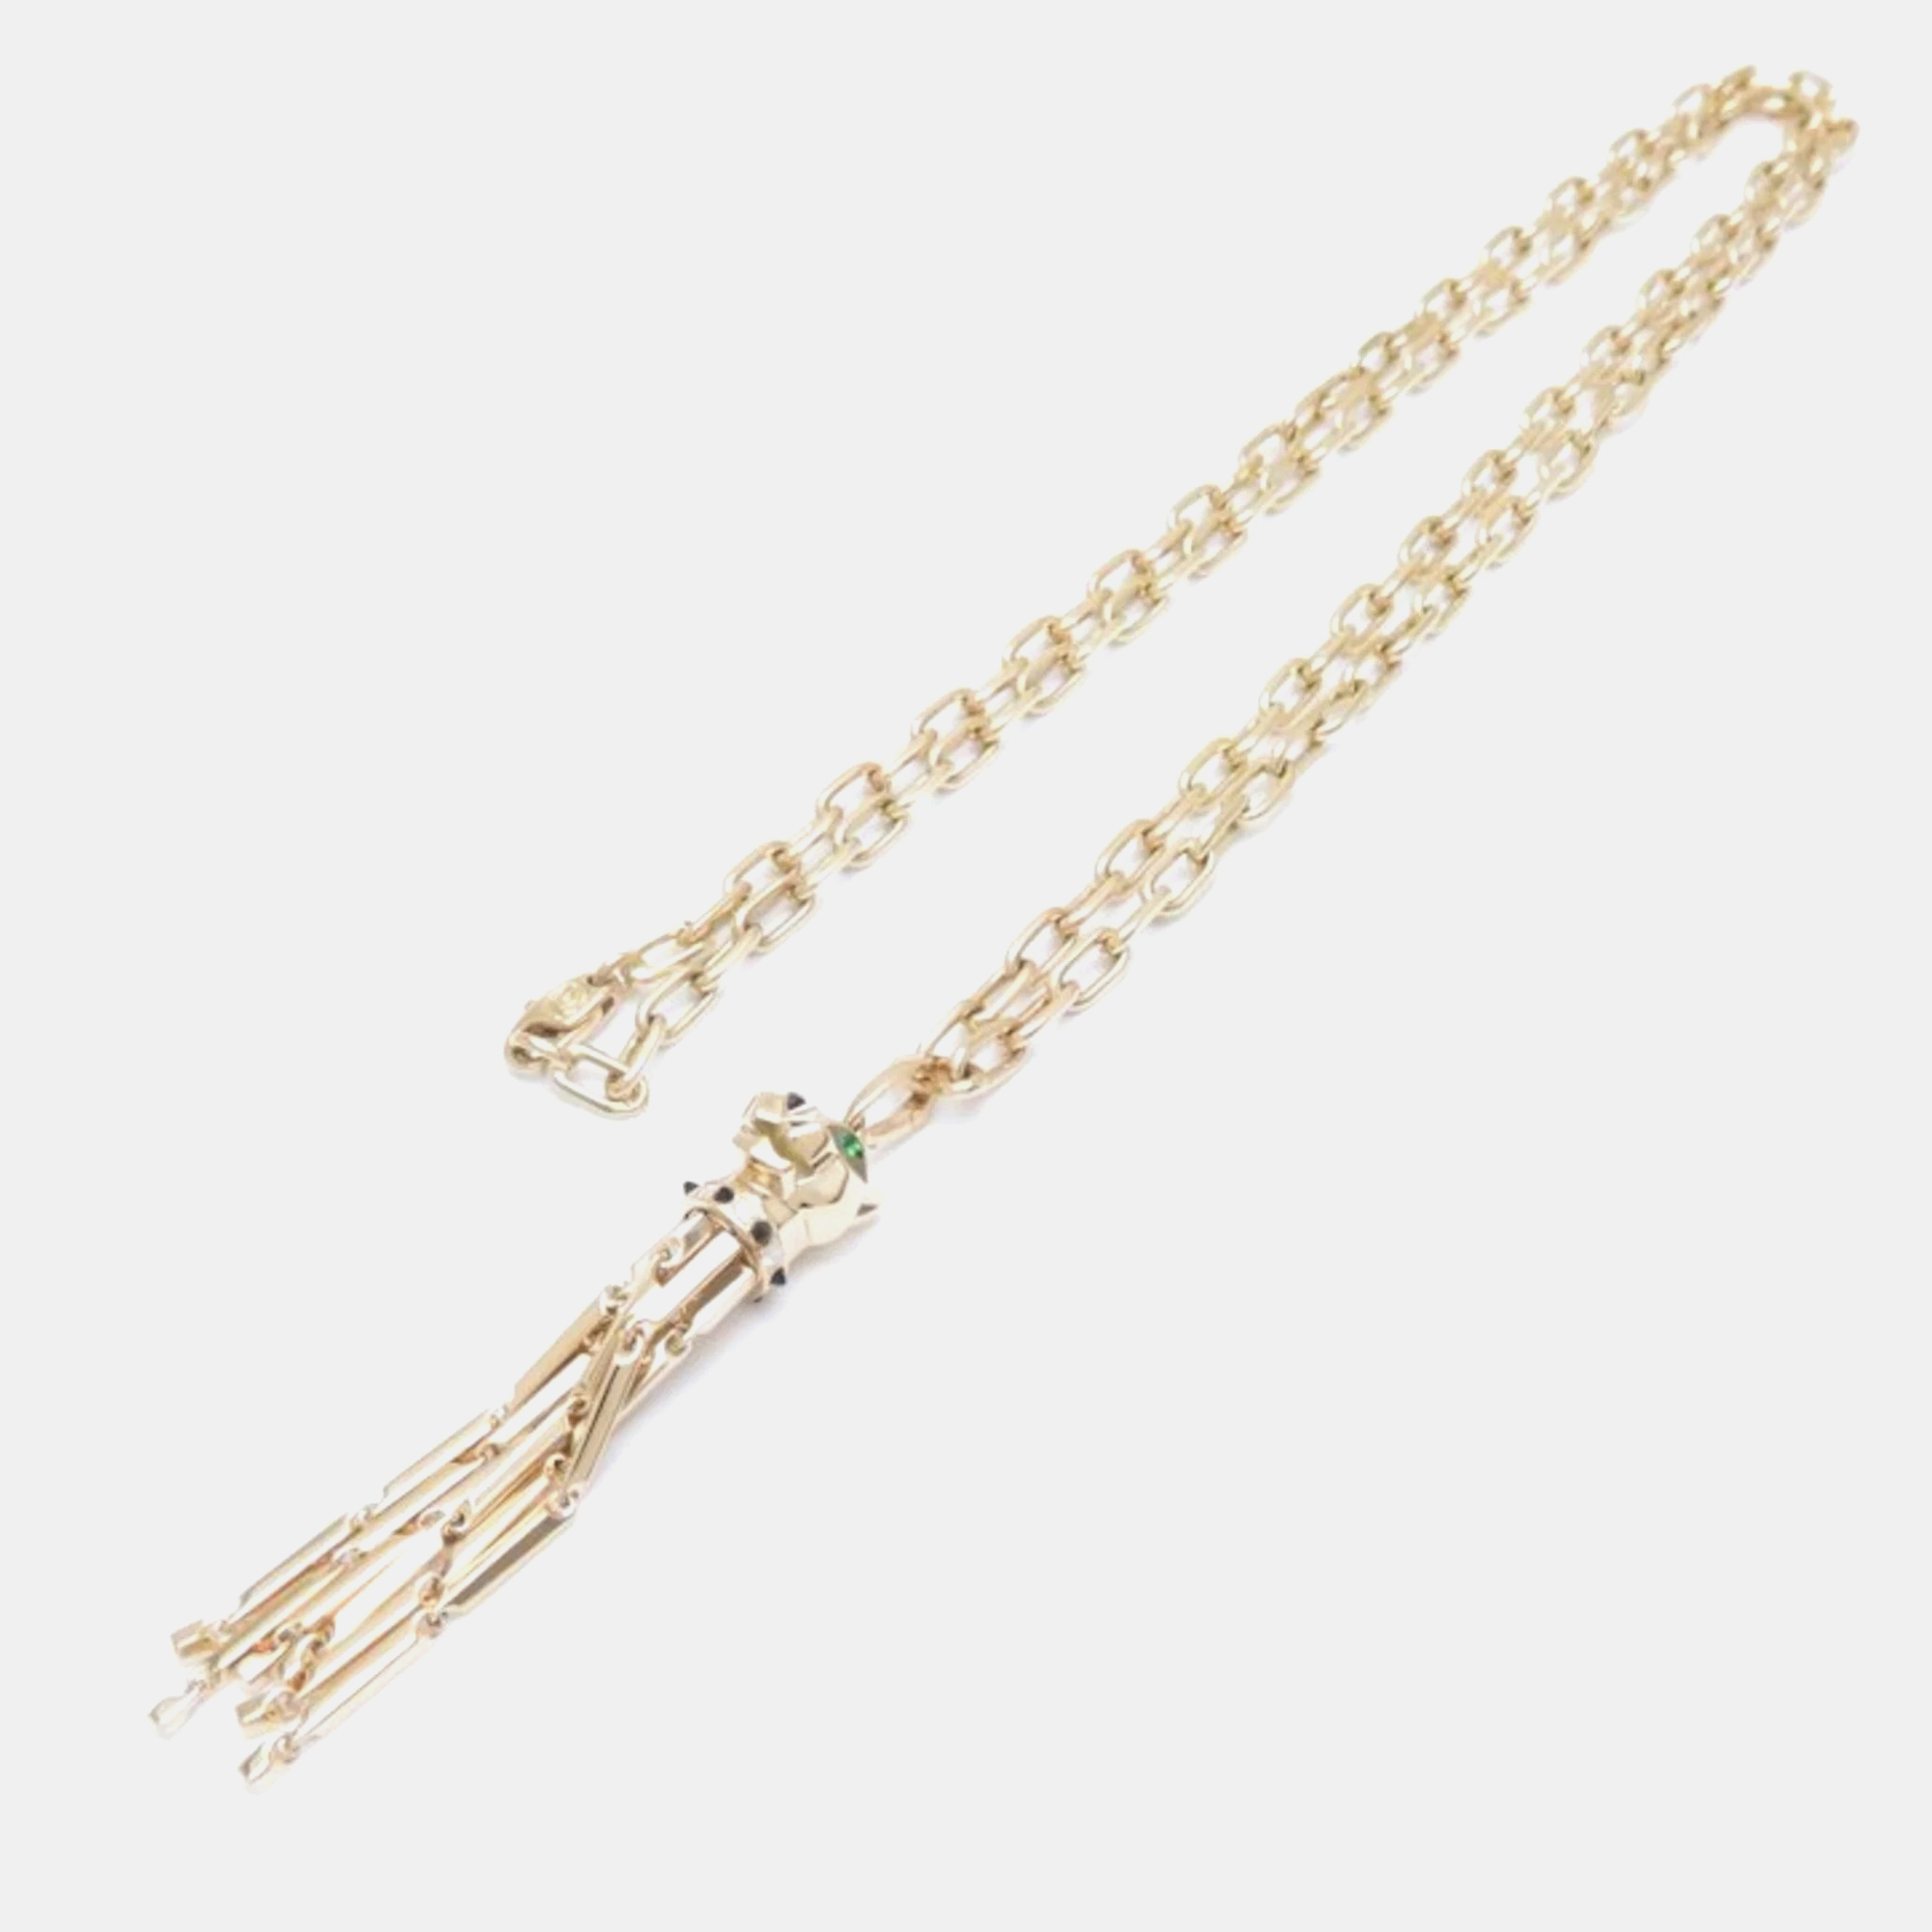 Discover the epitome of elegance with this Cartier necklace. Meticulously crafted with timeless design and artisanal excellence it encapsulates exclusivity. Elevate any outfit with a symbol of enduring value and exquisite craftsmanship.